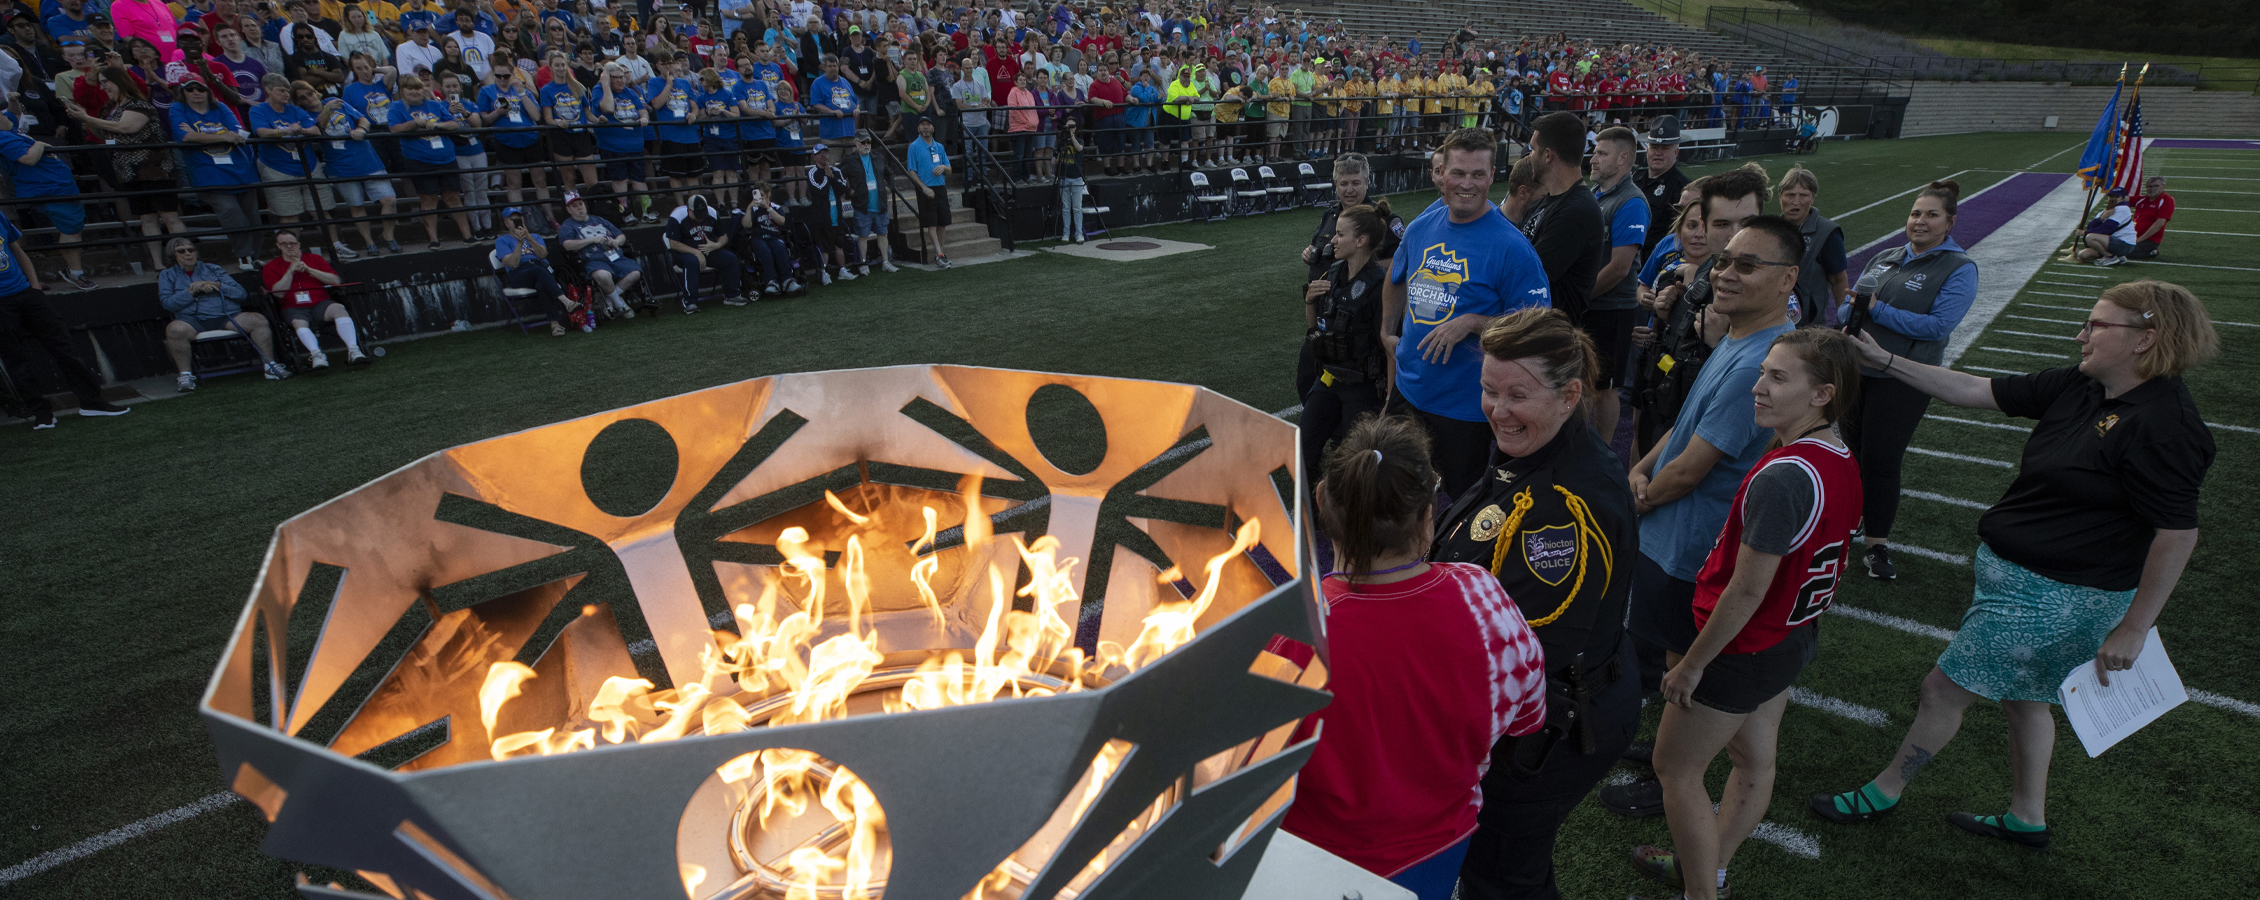 People gather in Perkins Stadium for the opening ceremonies with a fire burning in the cauldron.